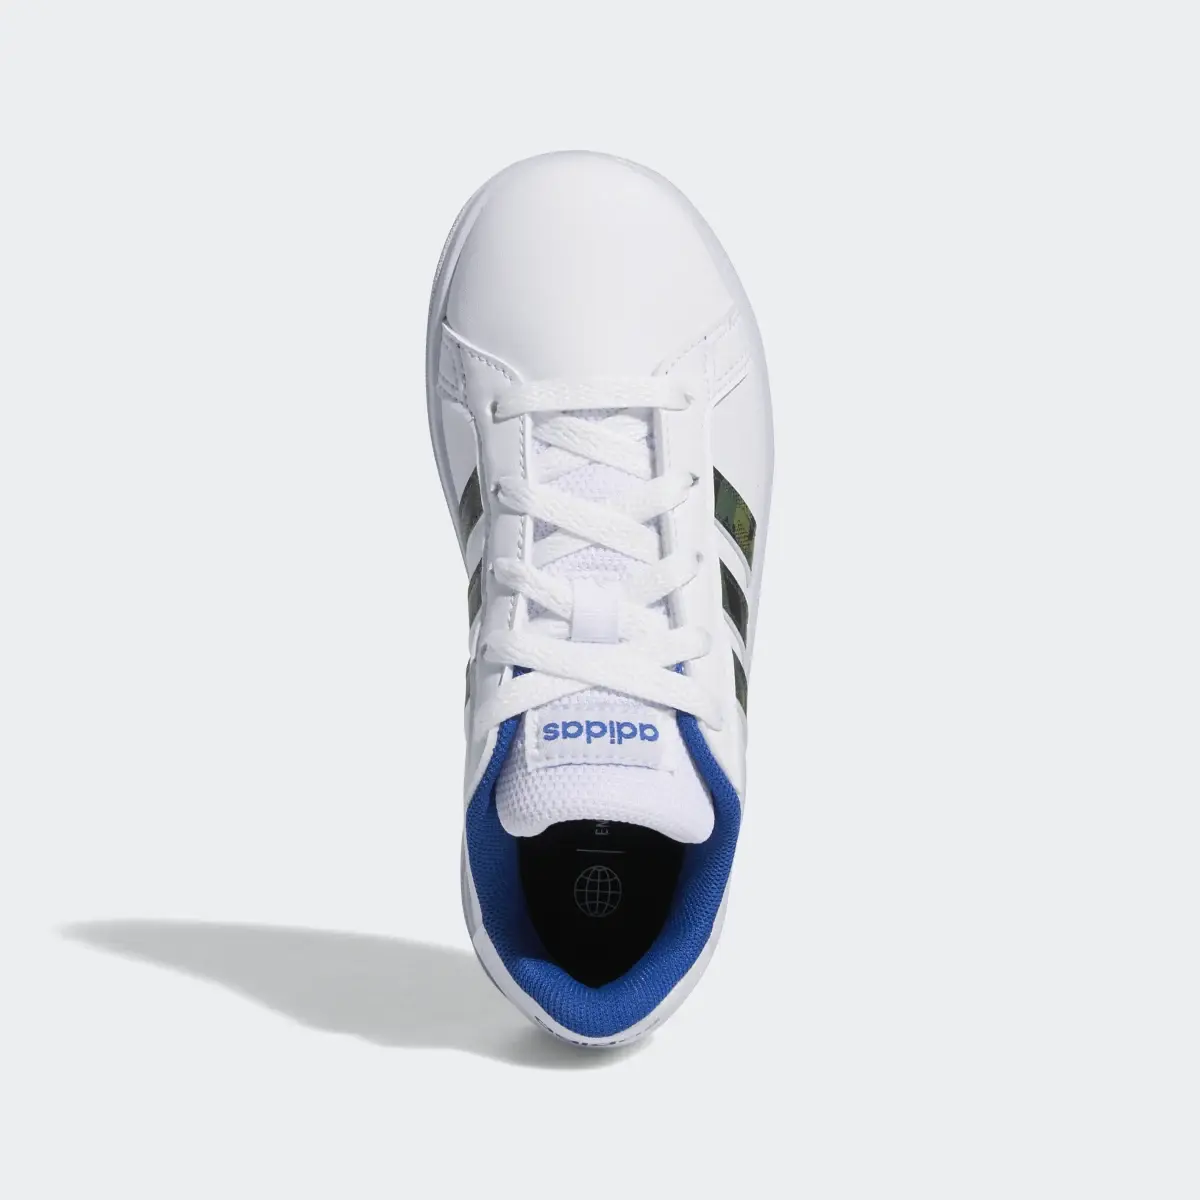 Adidas Grand Court Lifestyle Lace Tennis Shoes. 3